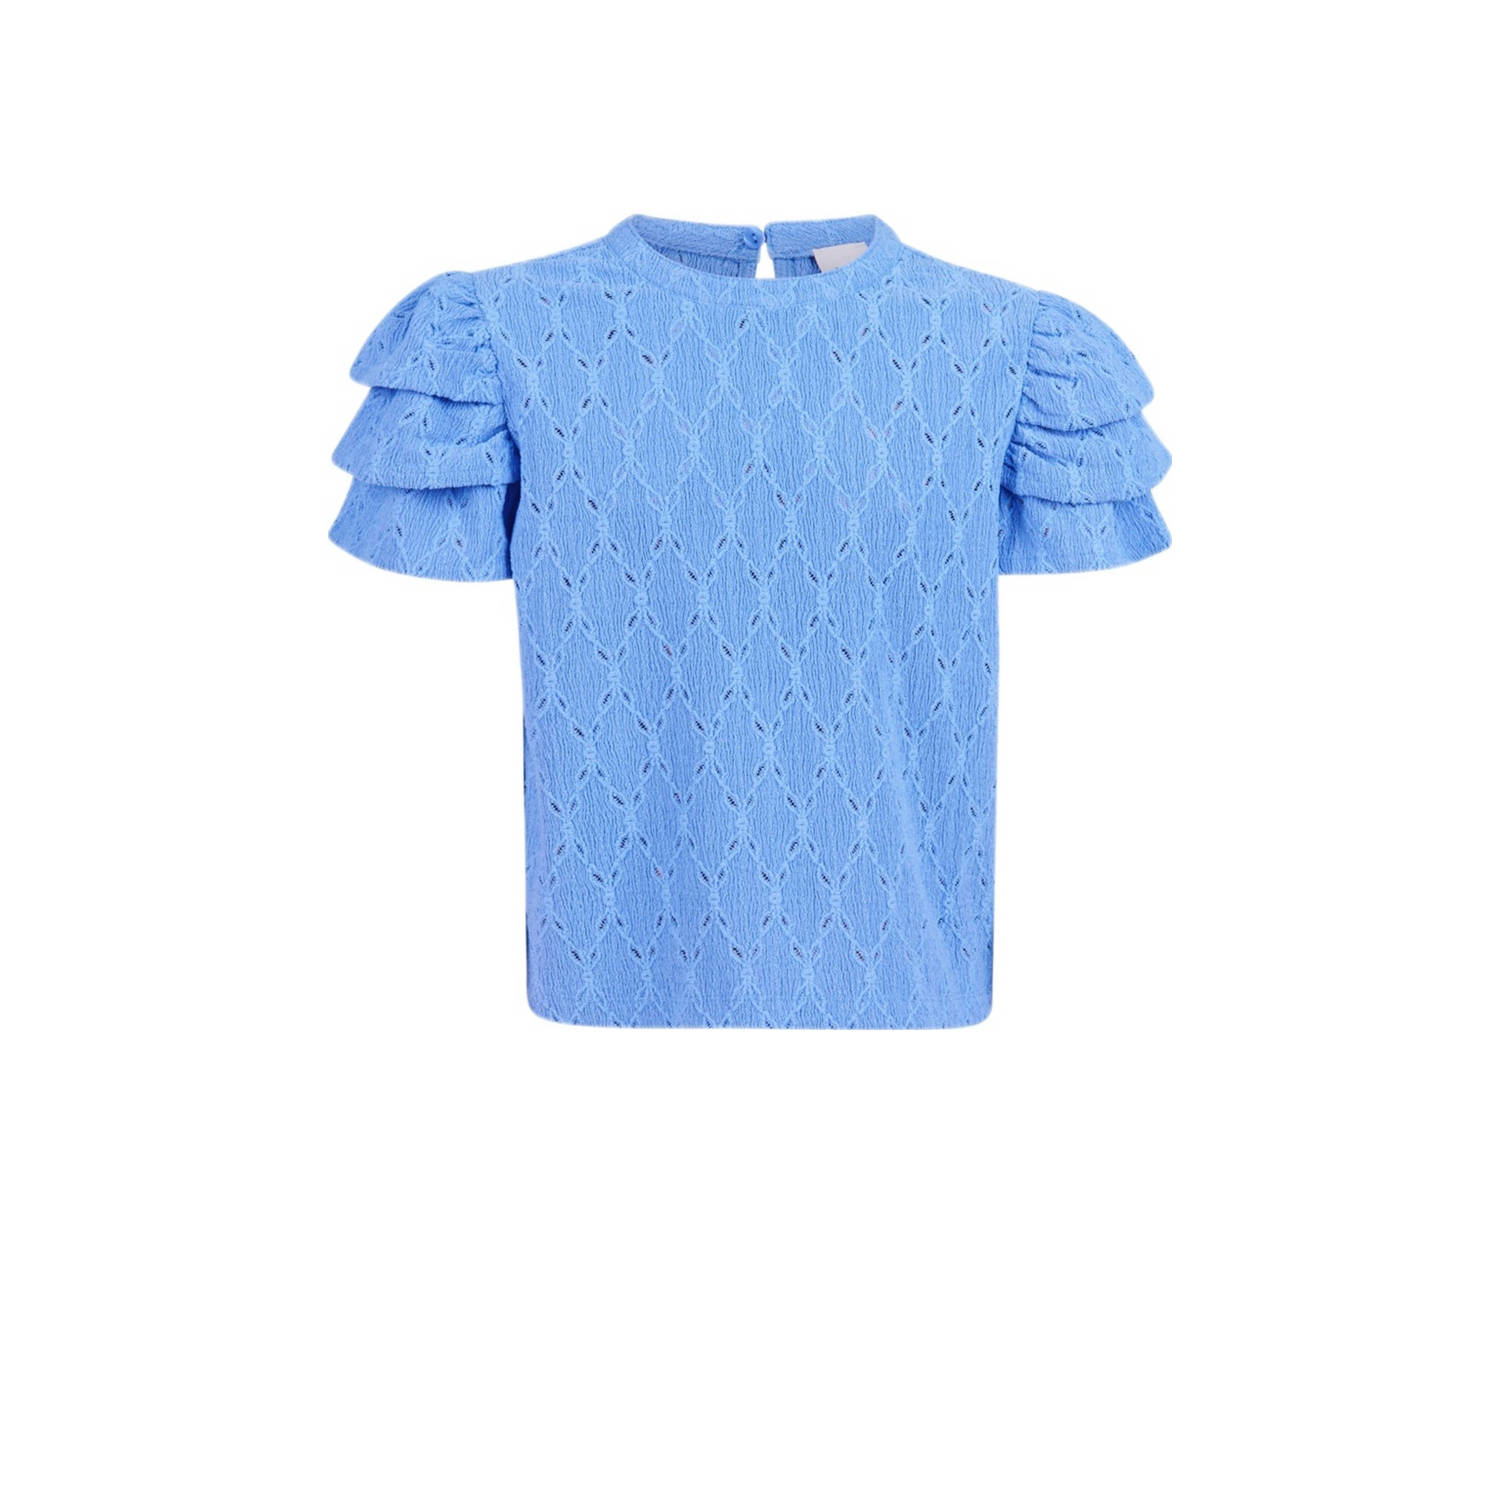 Shoeby T-shirt met all over print blauw Meisjes Polyester Ronde hals All over print 146 152